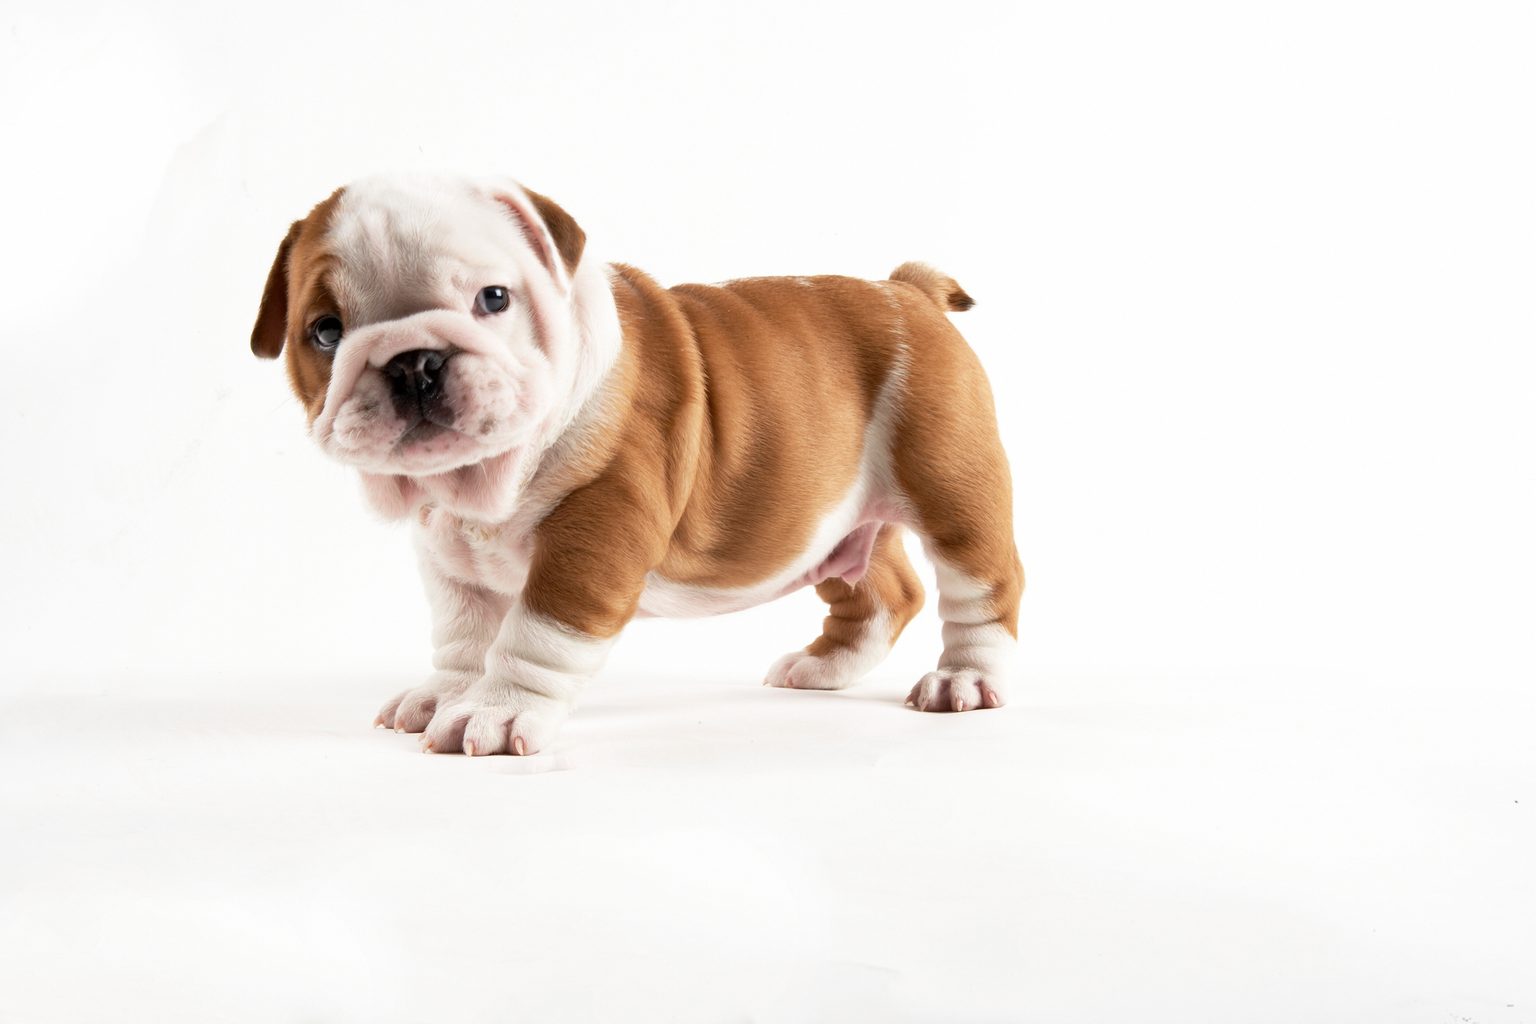 If You Want to Know the Number of 👶🏻 Kids You’ll Have, Choose Some 🐶 Dogs to Find Out Bulldog Puppy